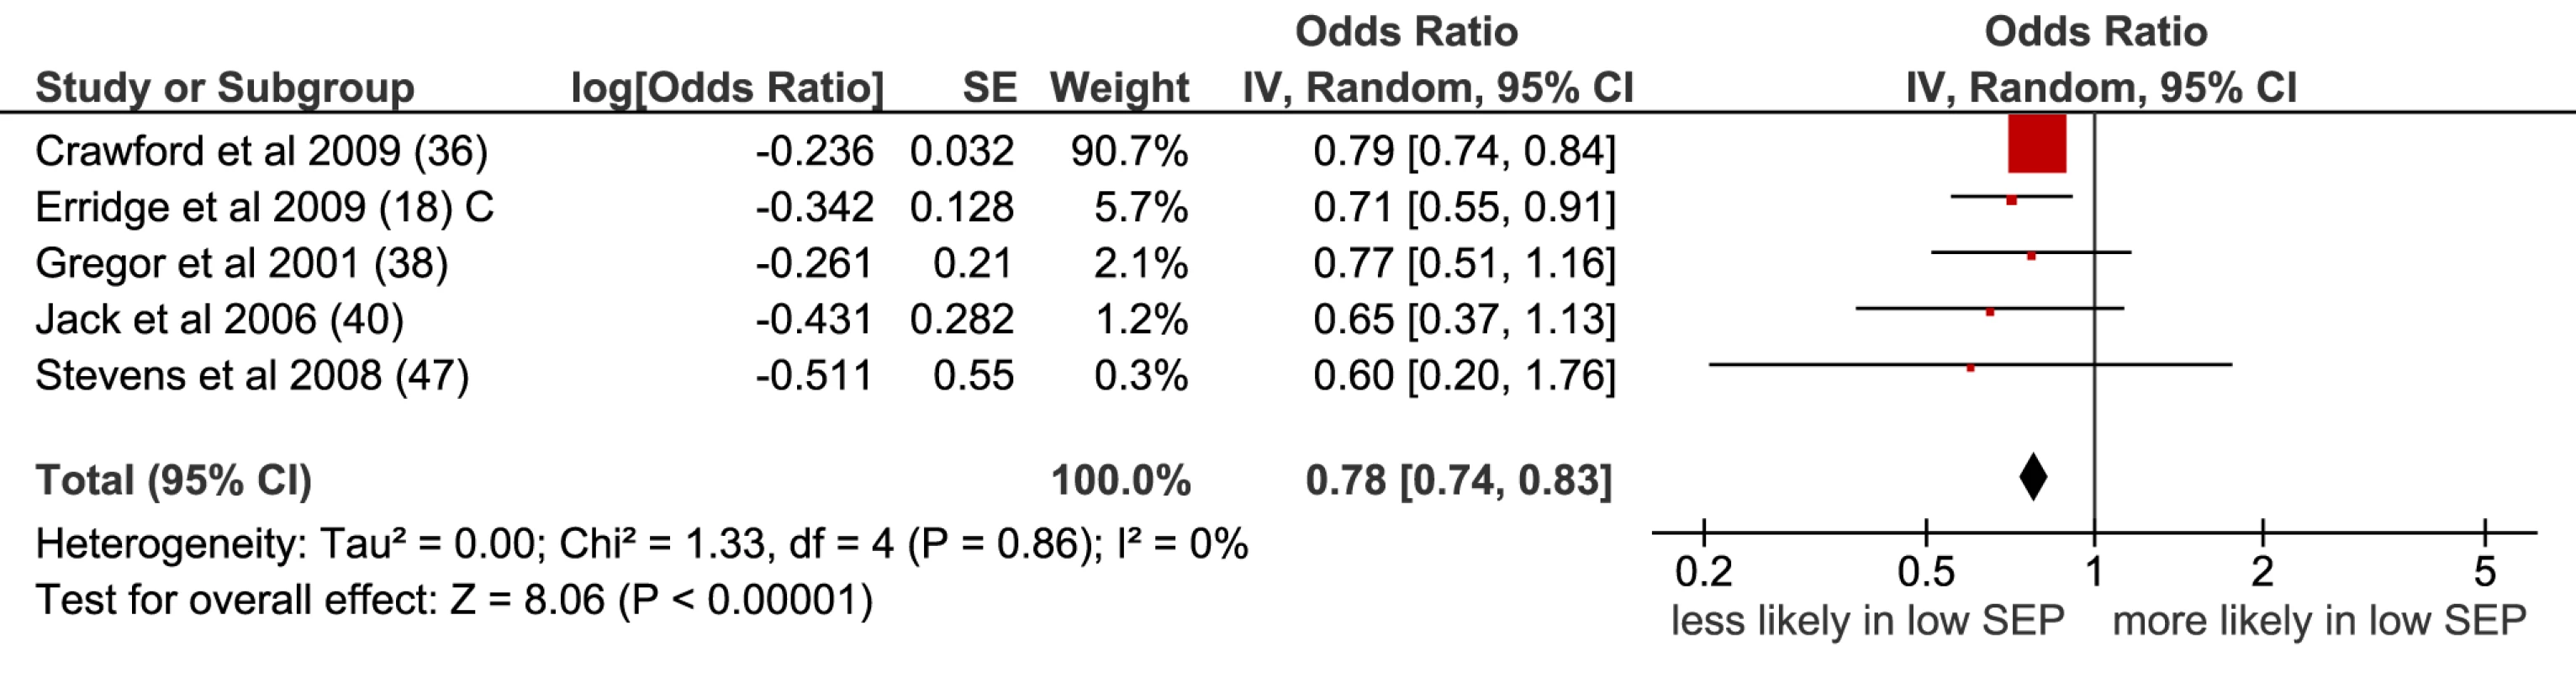 Meta-analysis of odds of receipt of unspecified treatment in low versus high SEP.